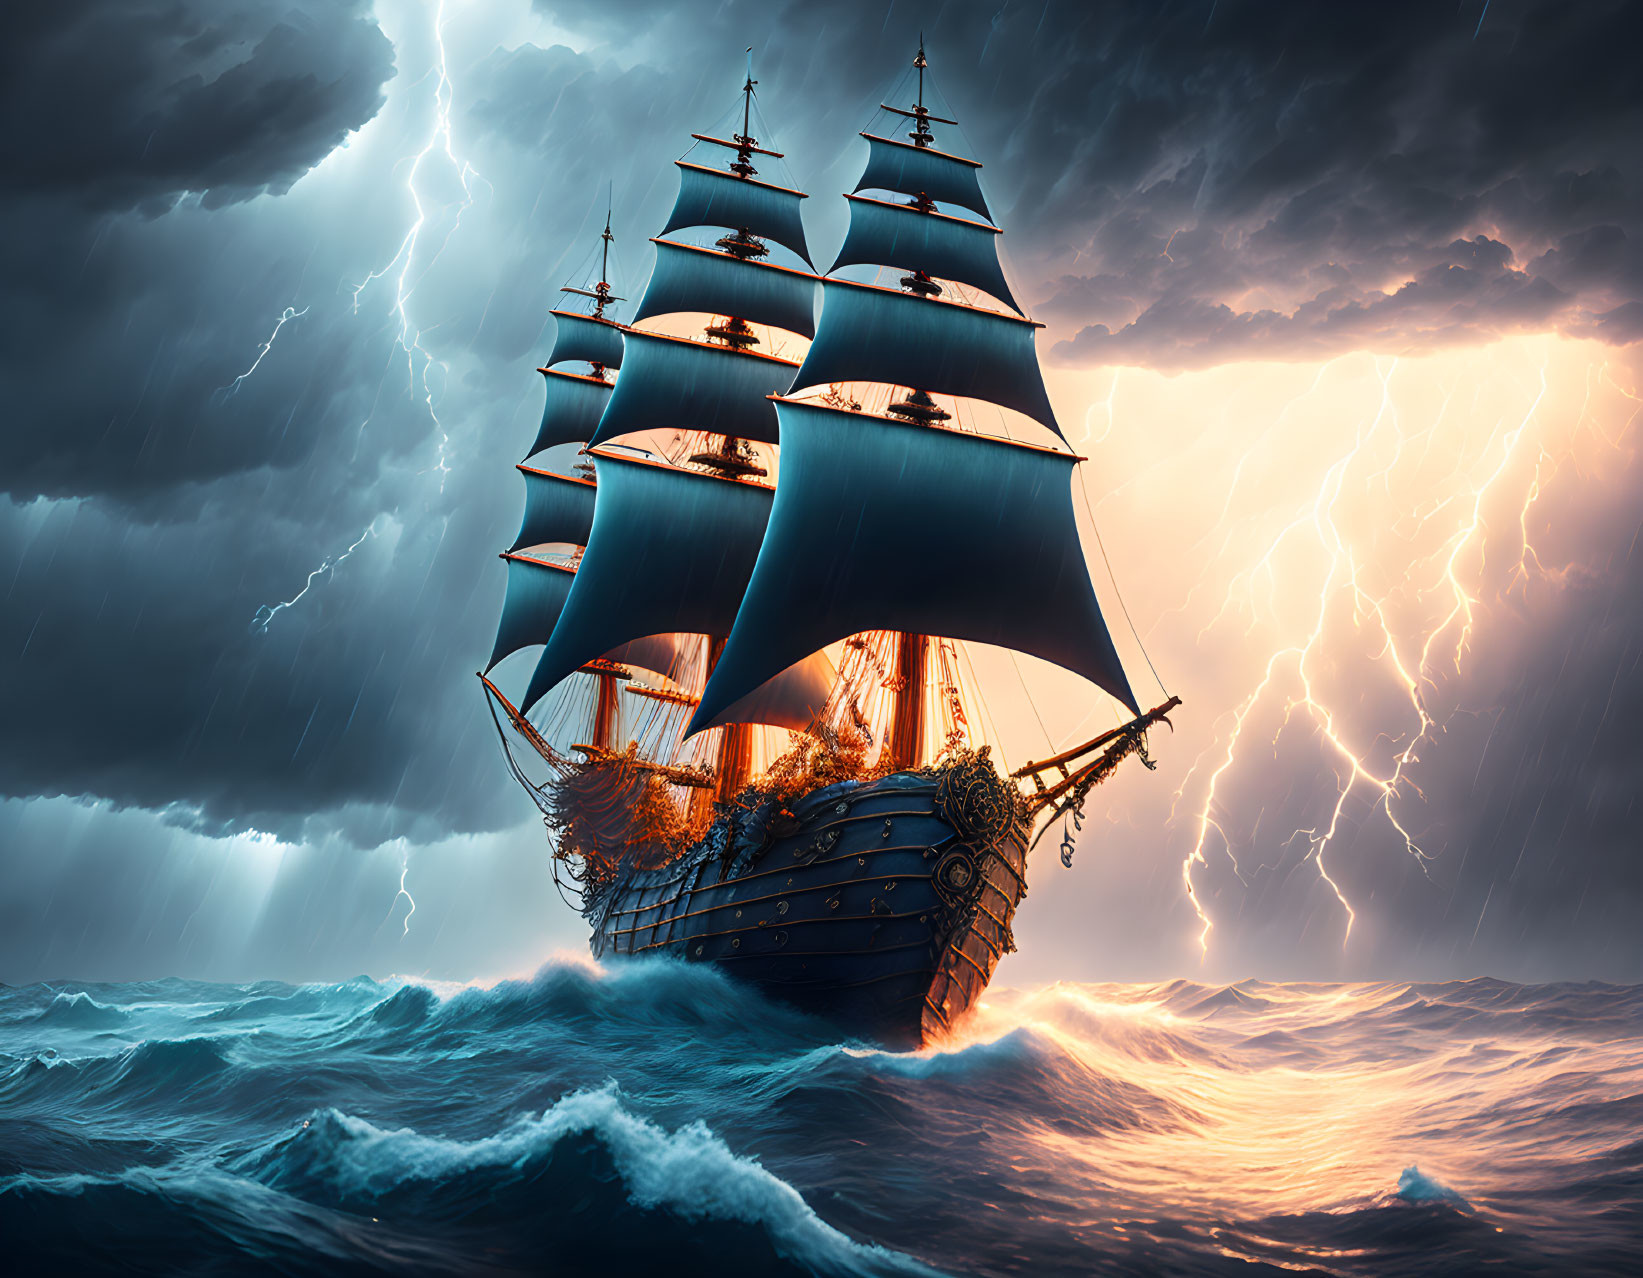 Tall ship with billowing sails in tumultuous seas under dramatic sky